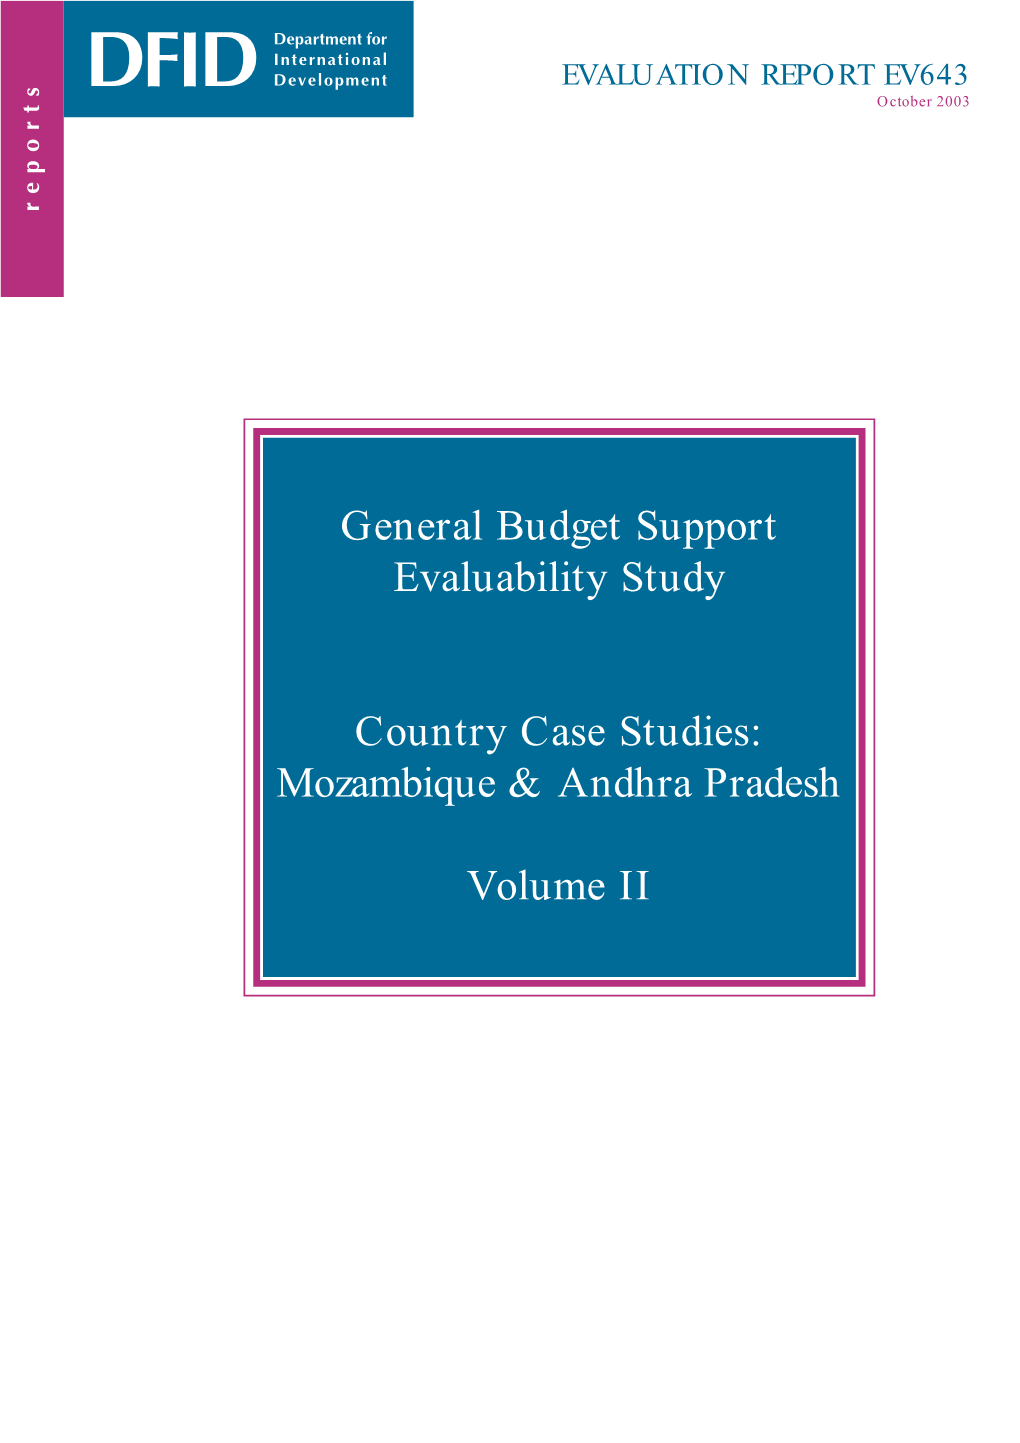 General Budget Support Evaluability Study Country Case Studies